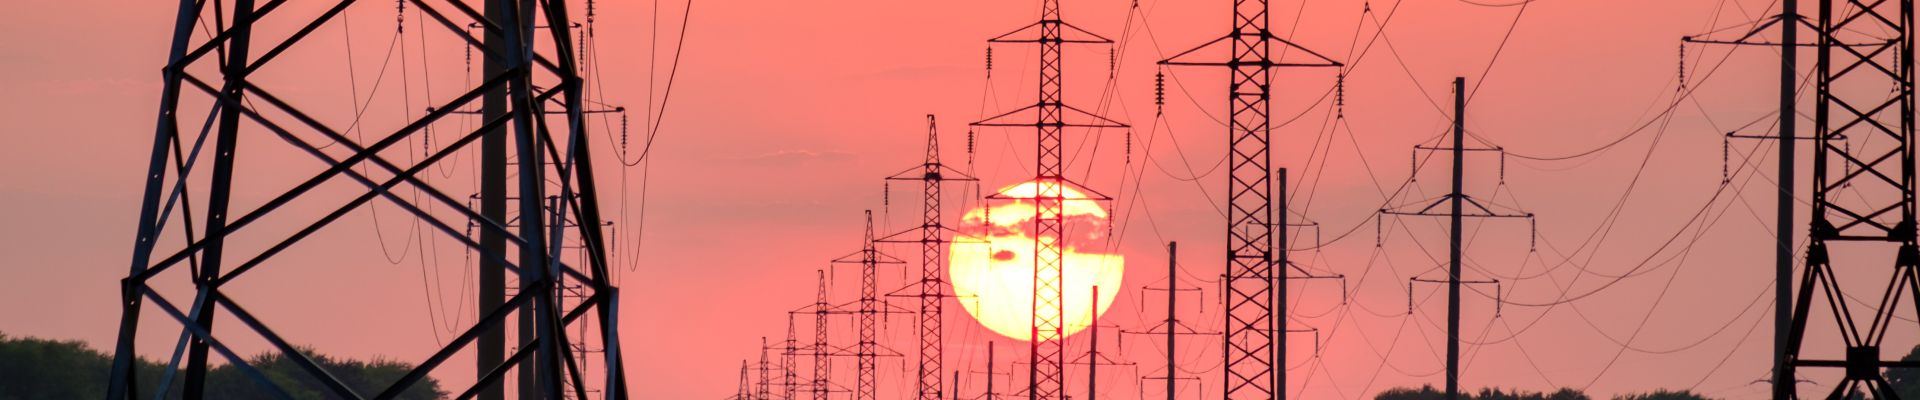 Electricity pylons in front of sunset